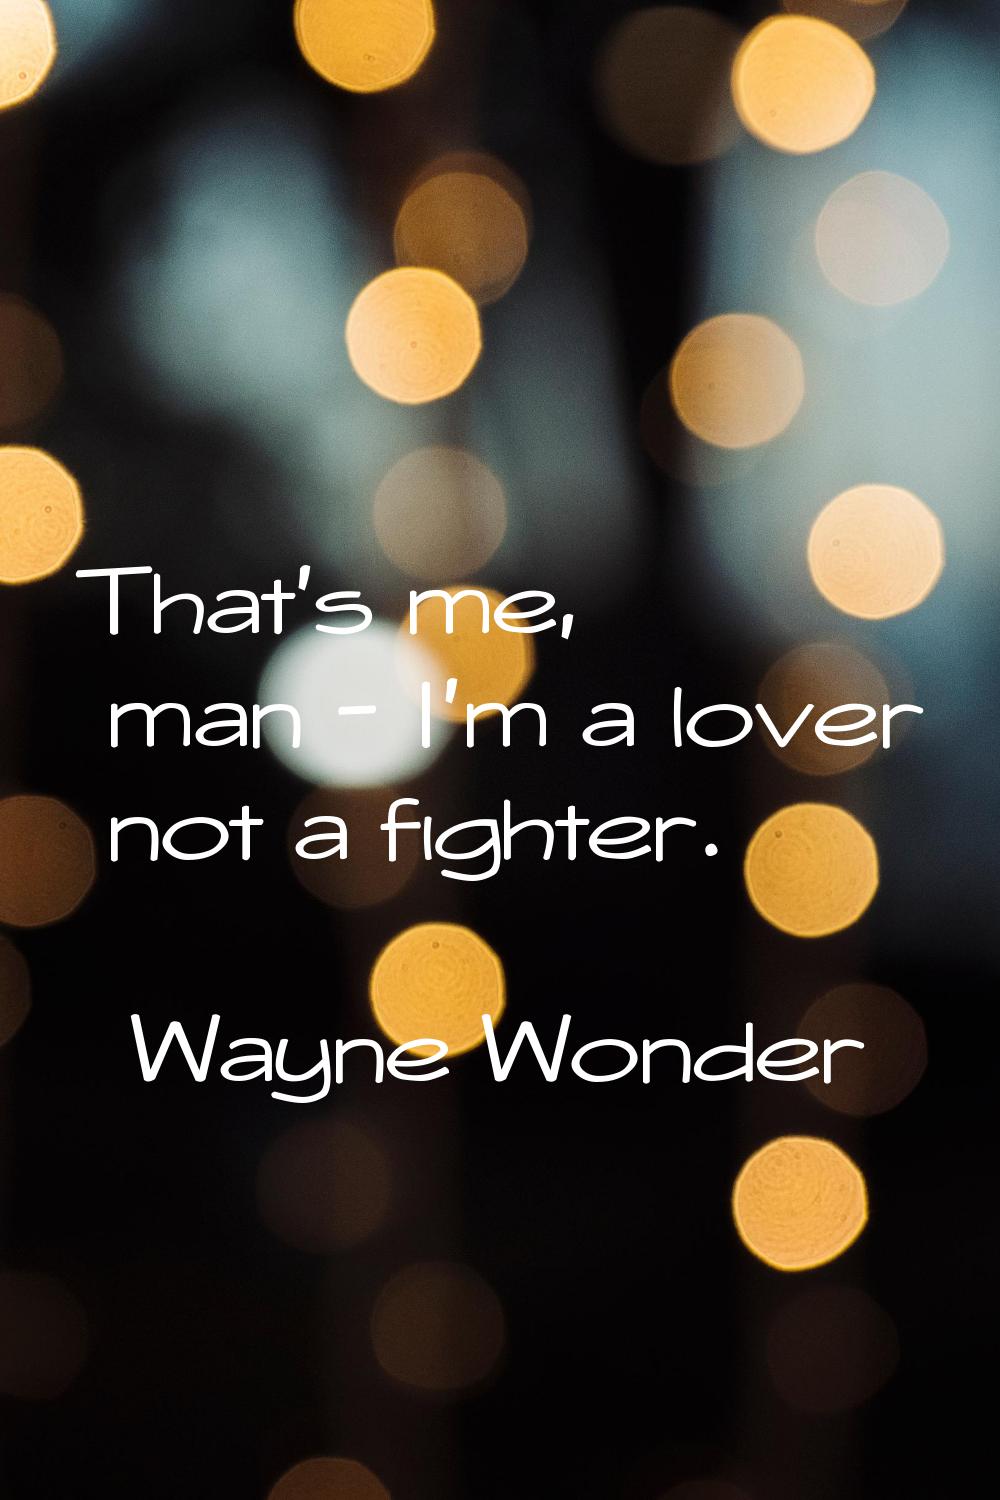 That's me, man - I'm a lover not a fighter.